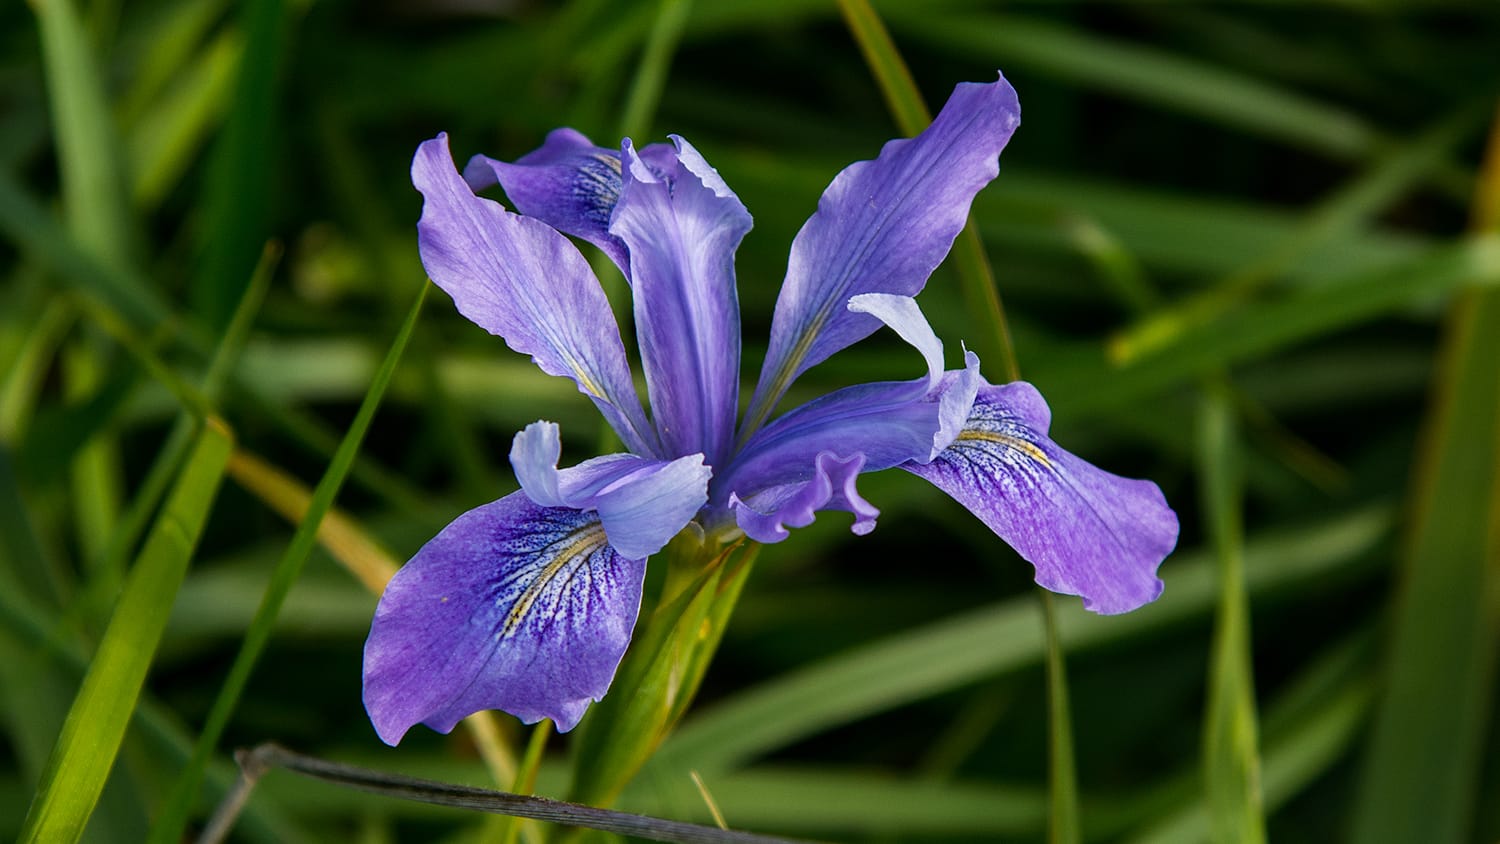 The Iris wildflower is prepared as a flower essence by FES.